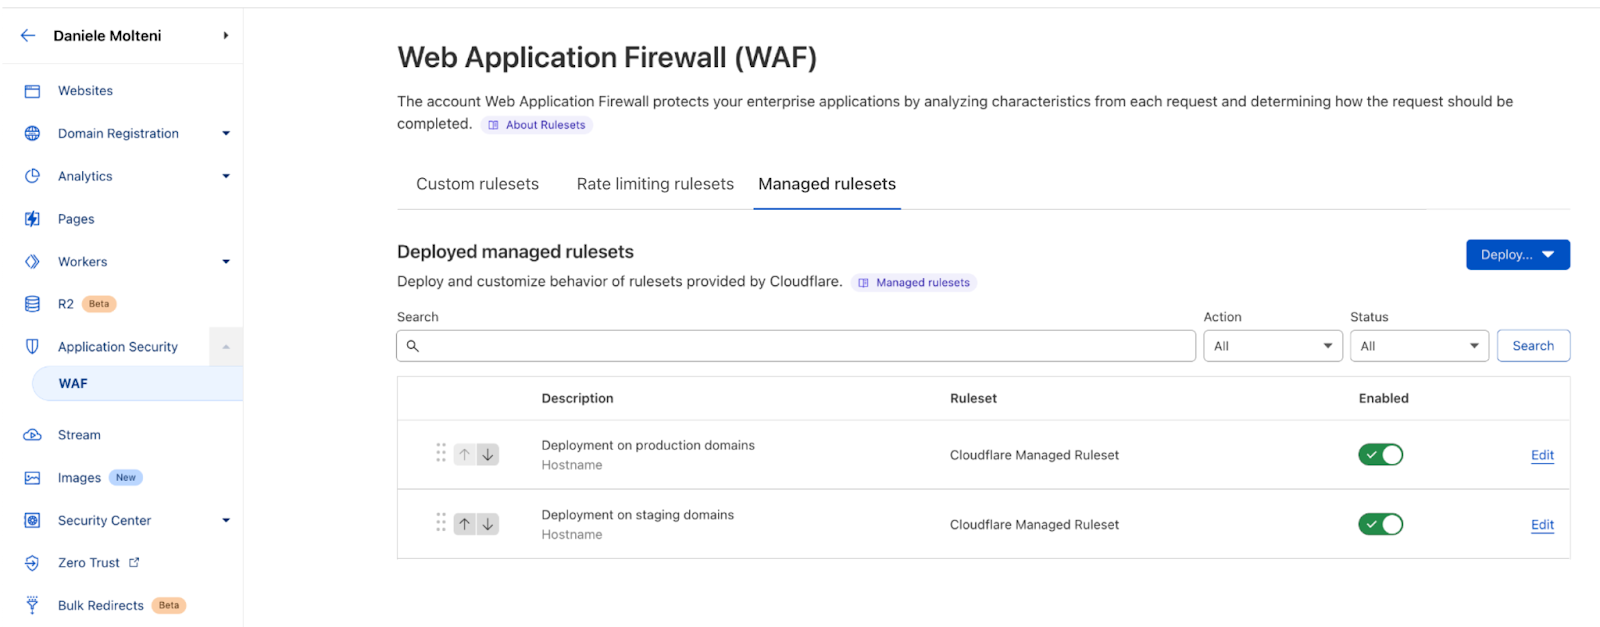 With Account WAF, you can deploy rulesets on multiple domains so you can manage a single (or just a few) WAF configuration for your entire account.